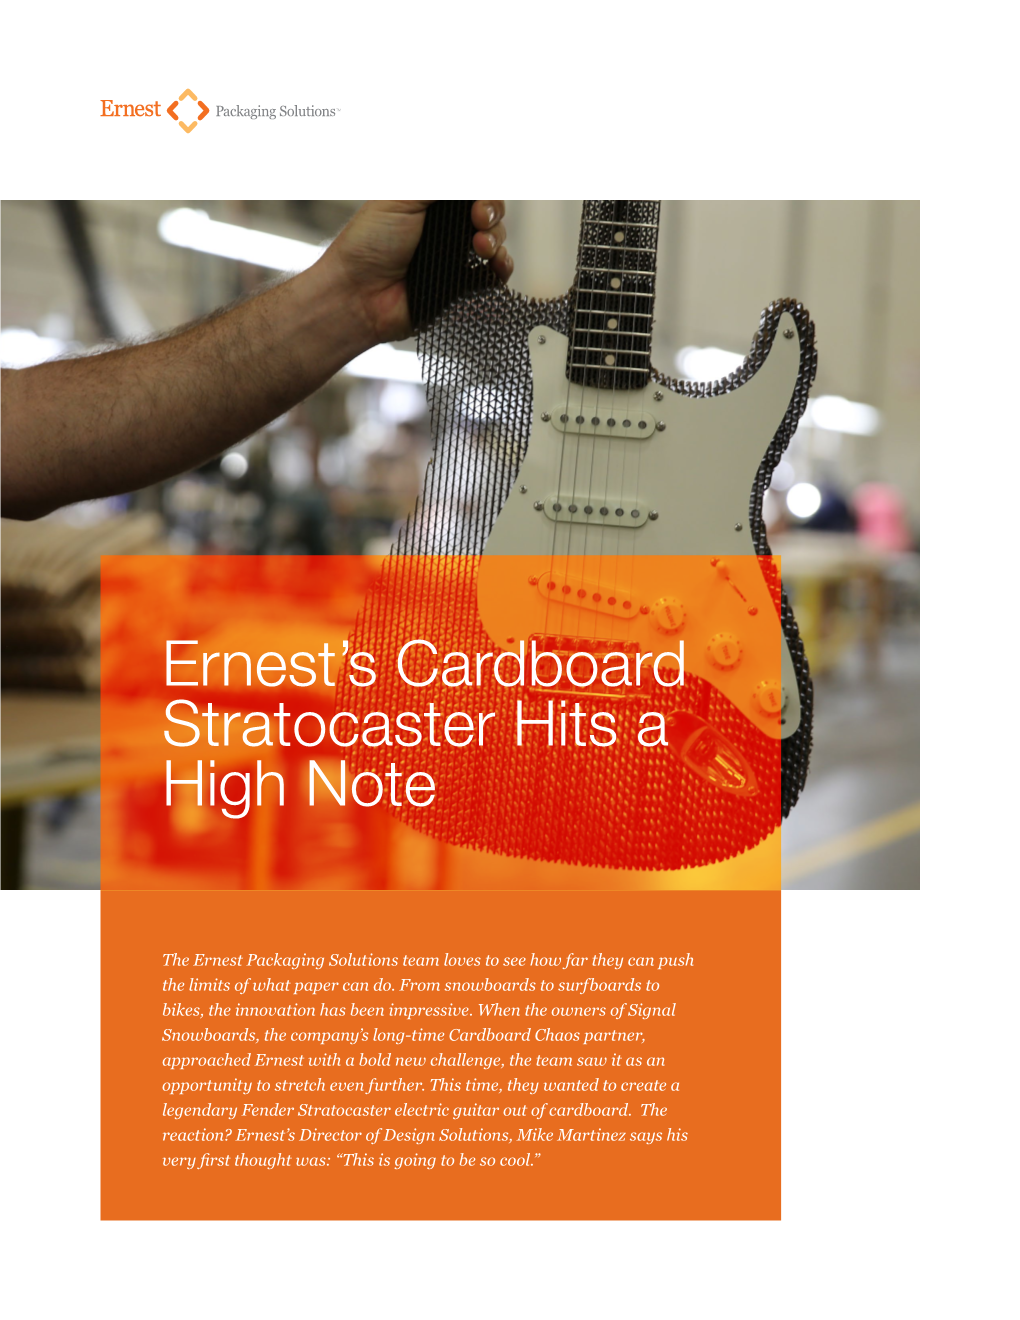 Ernest's Cardboard Stratocaster Hits a High Note